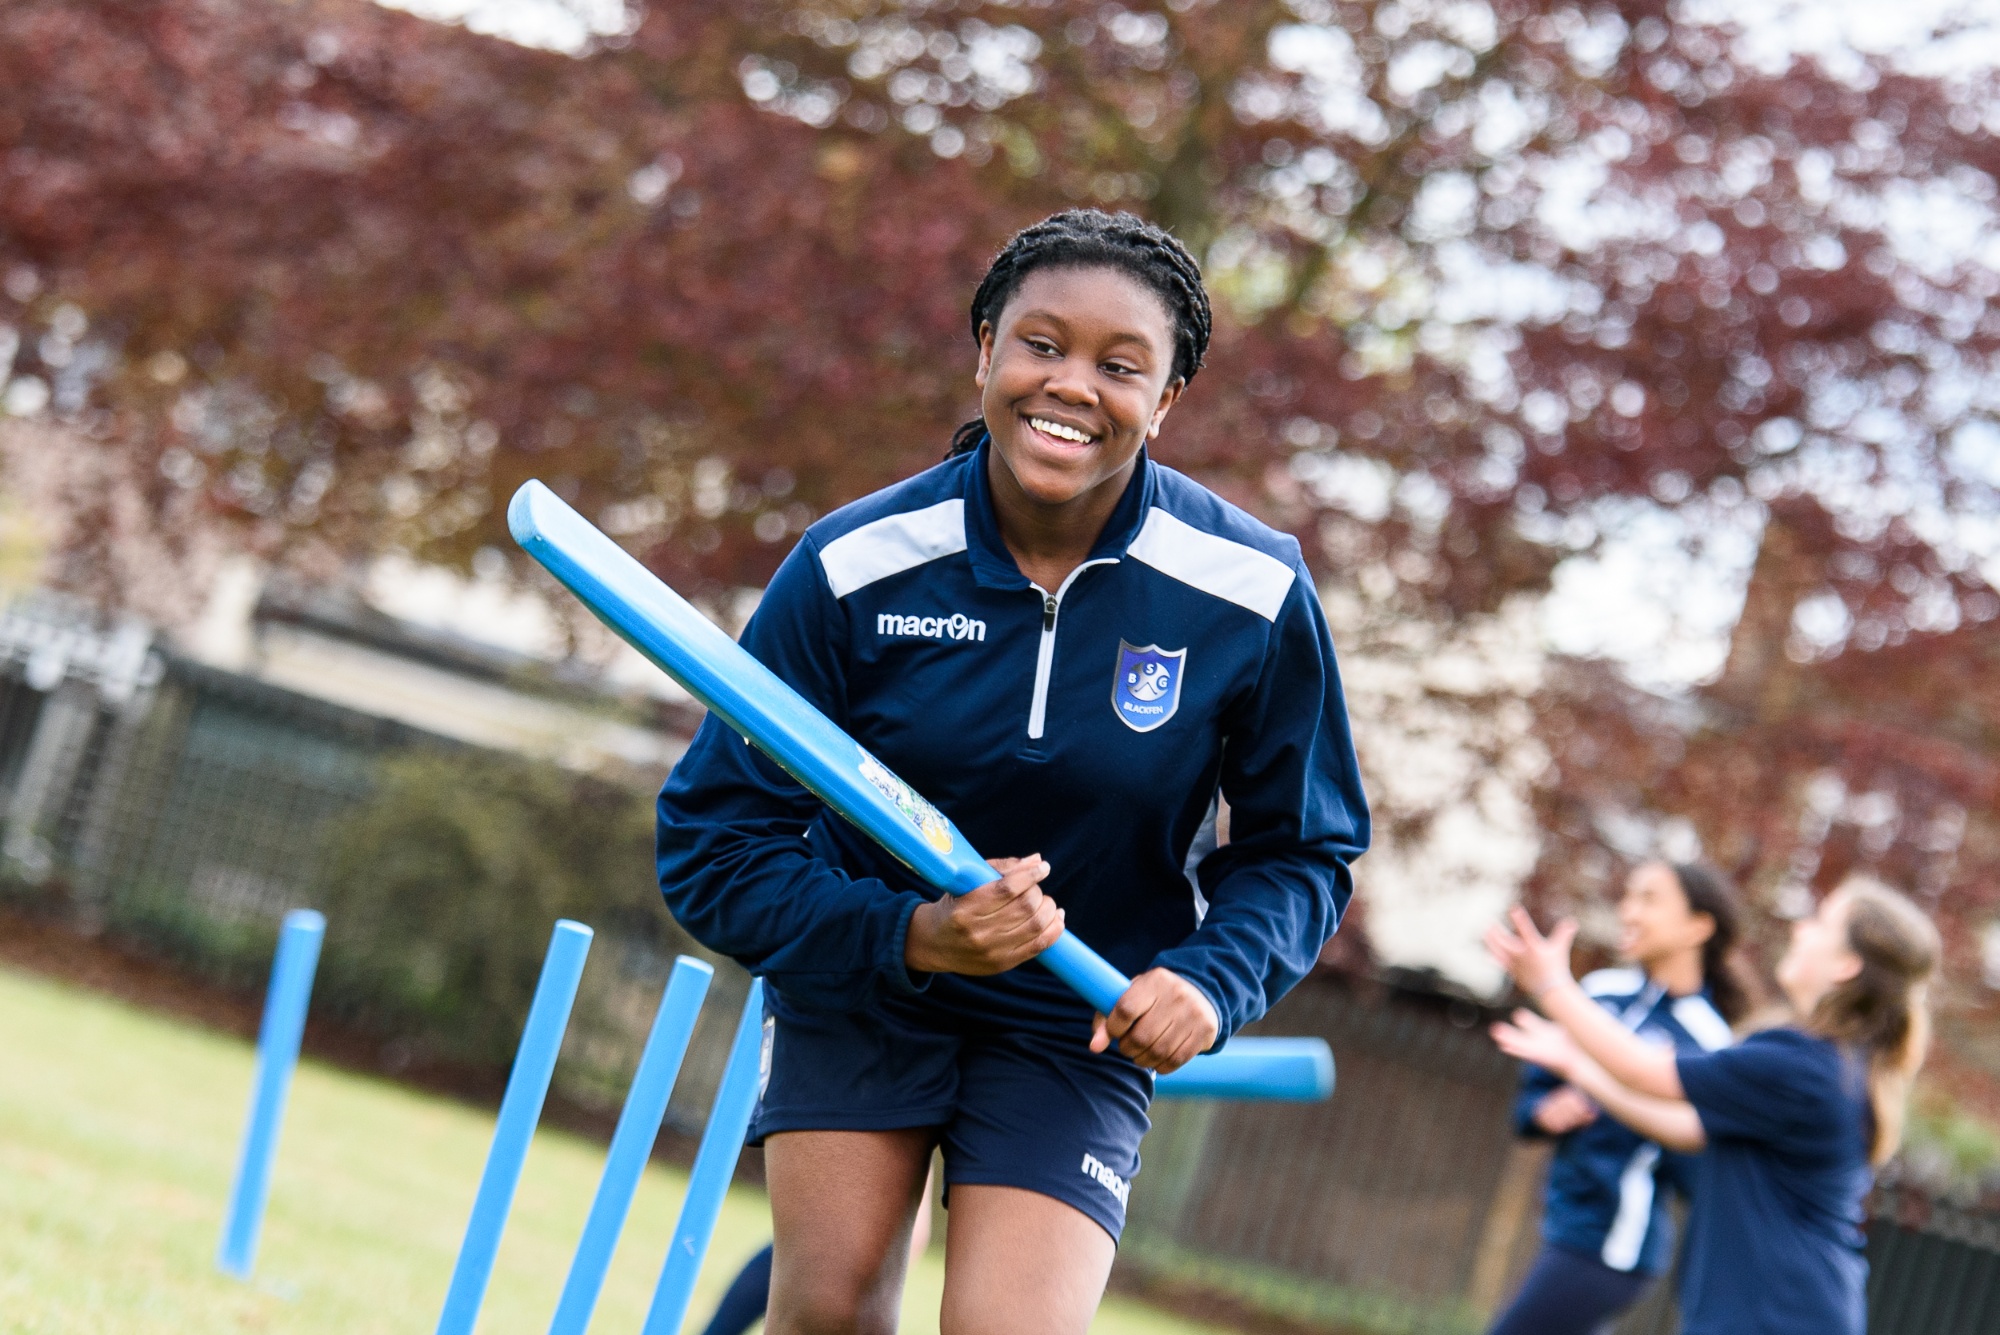 Girl playing cricket - PE lesson